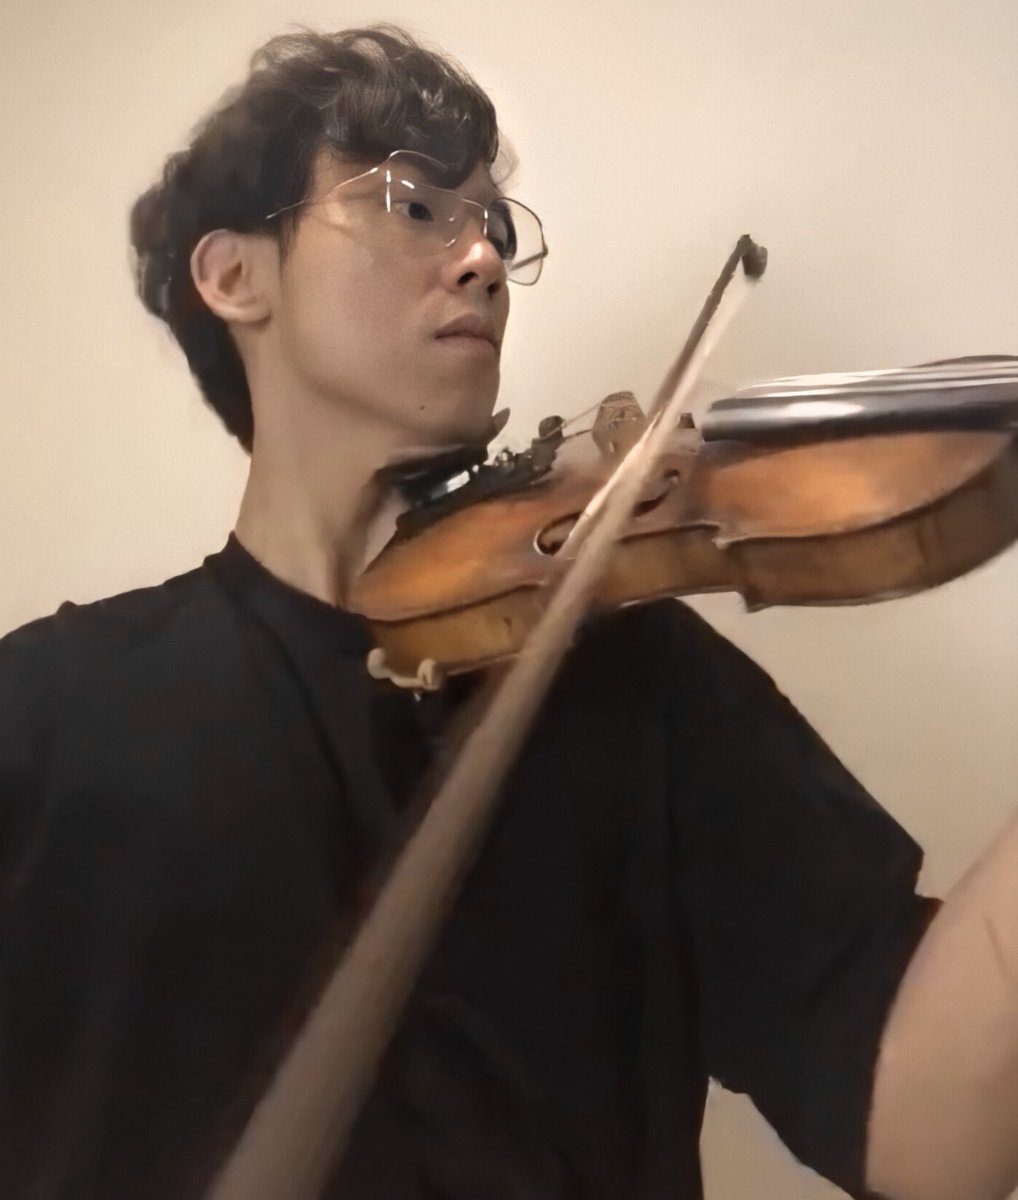 this is an eddy chen hate thread, he's destroying humans we must stop him